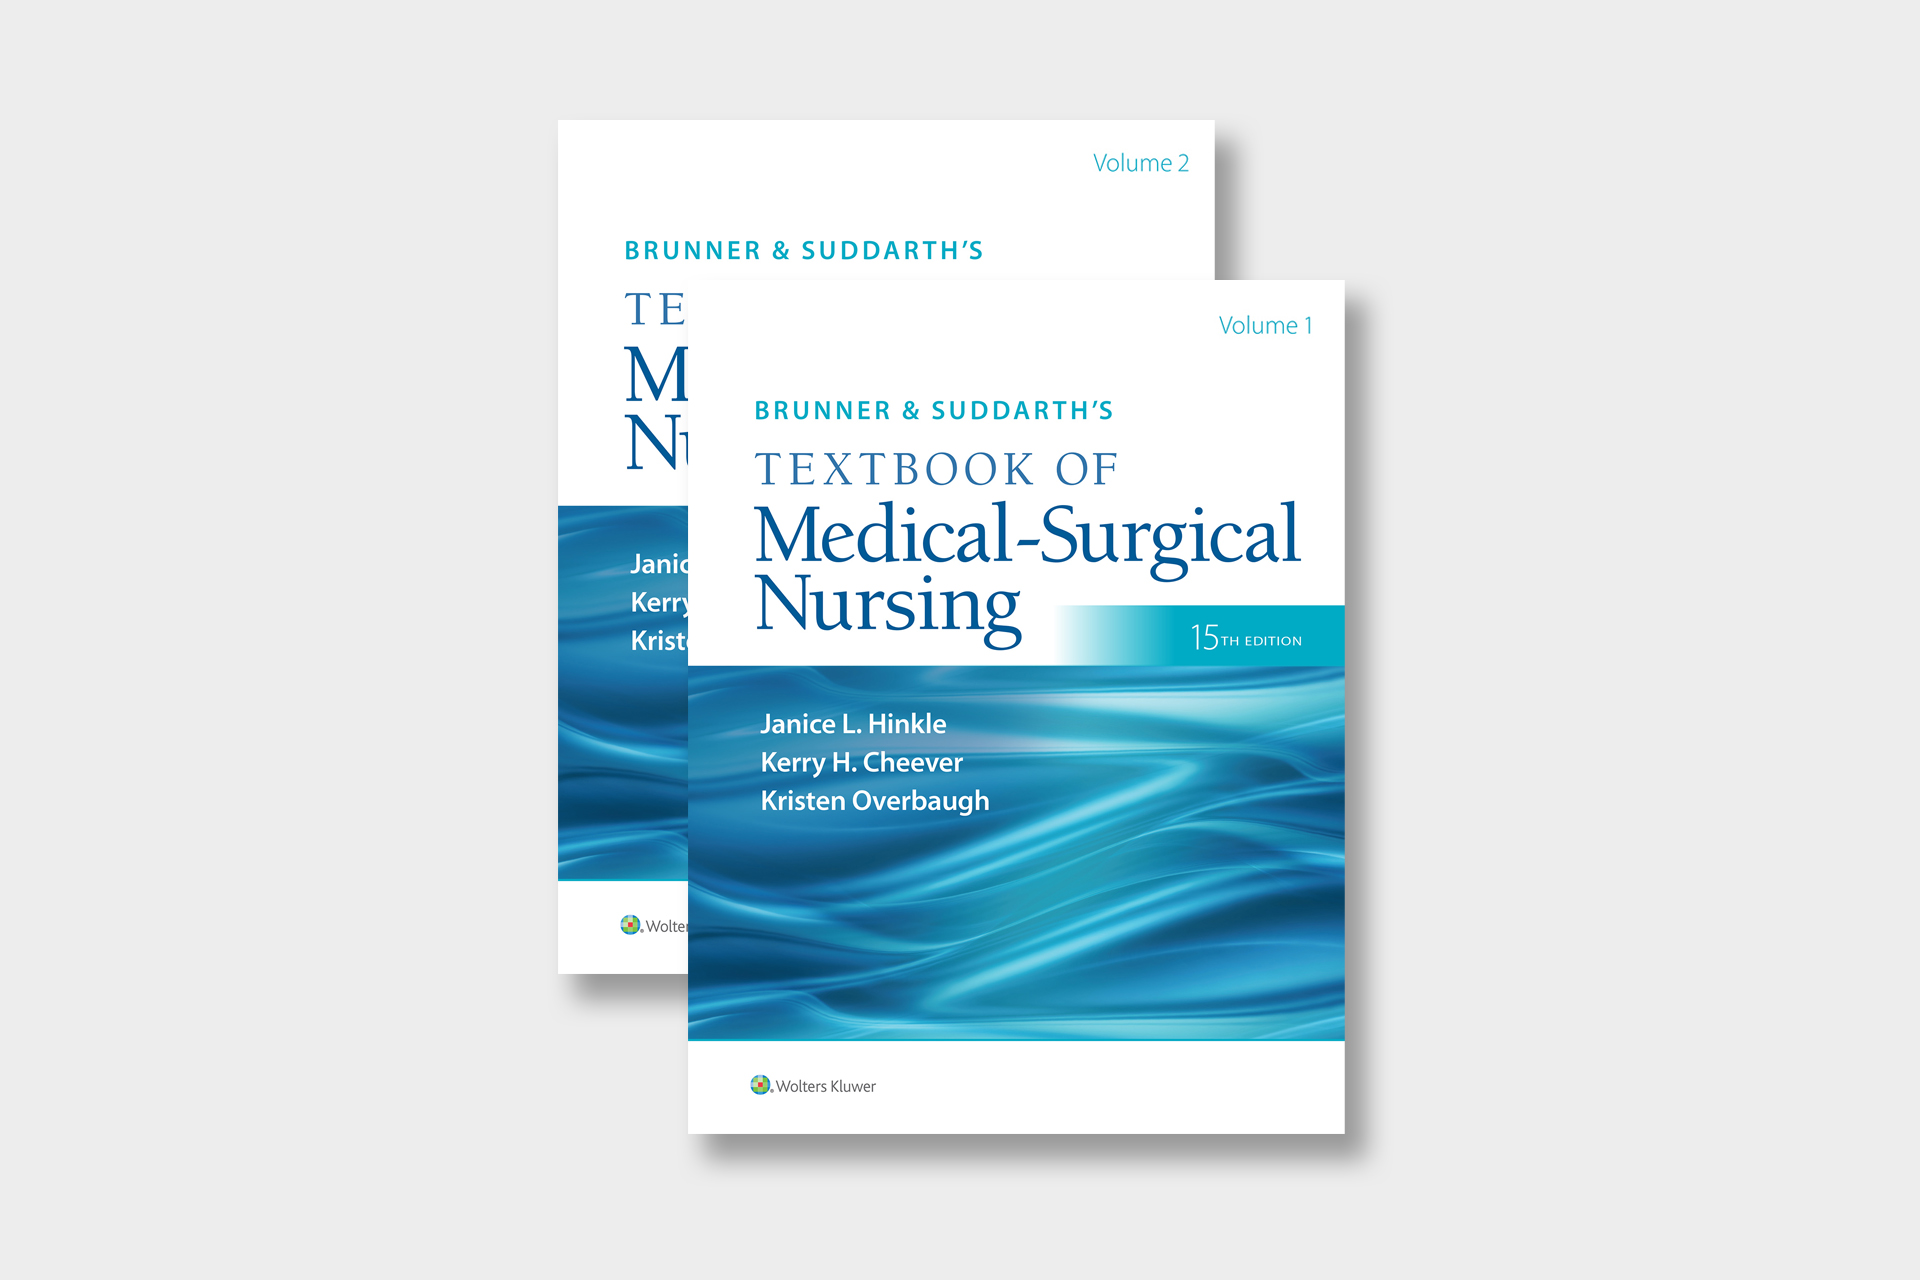 Brunner & Suddarth’s Textbook of Medical-Surgical Nursing, 15th Edition, 2 volume covers